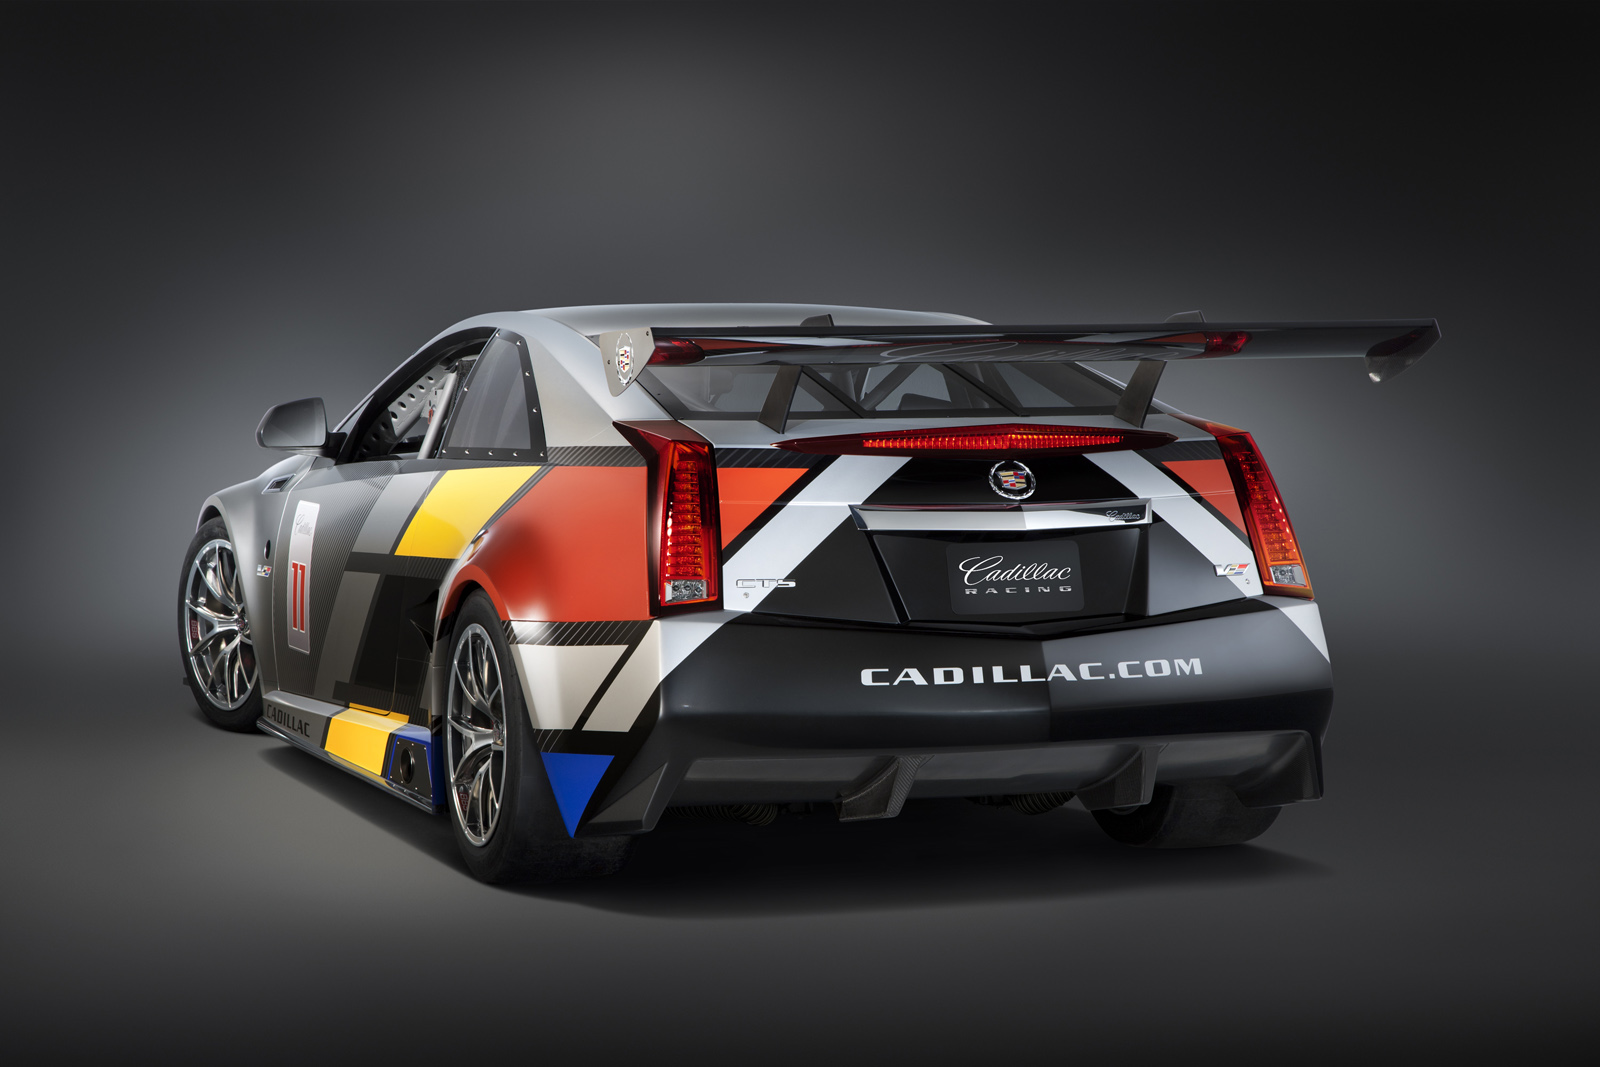 2011 Cadillac CTS-V Coupe Racecar